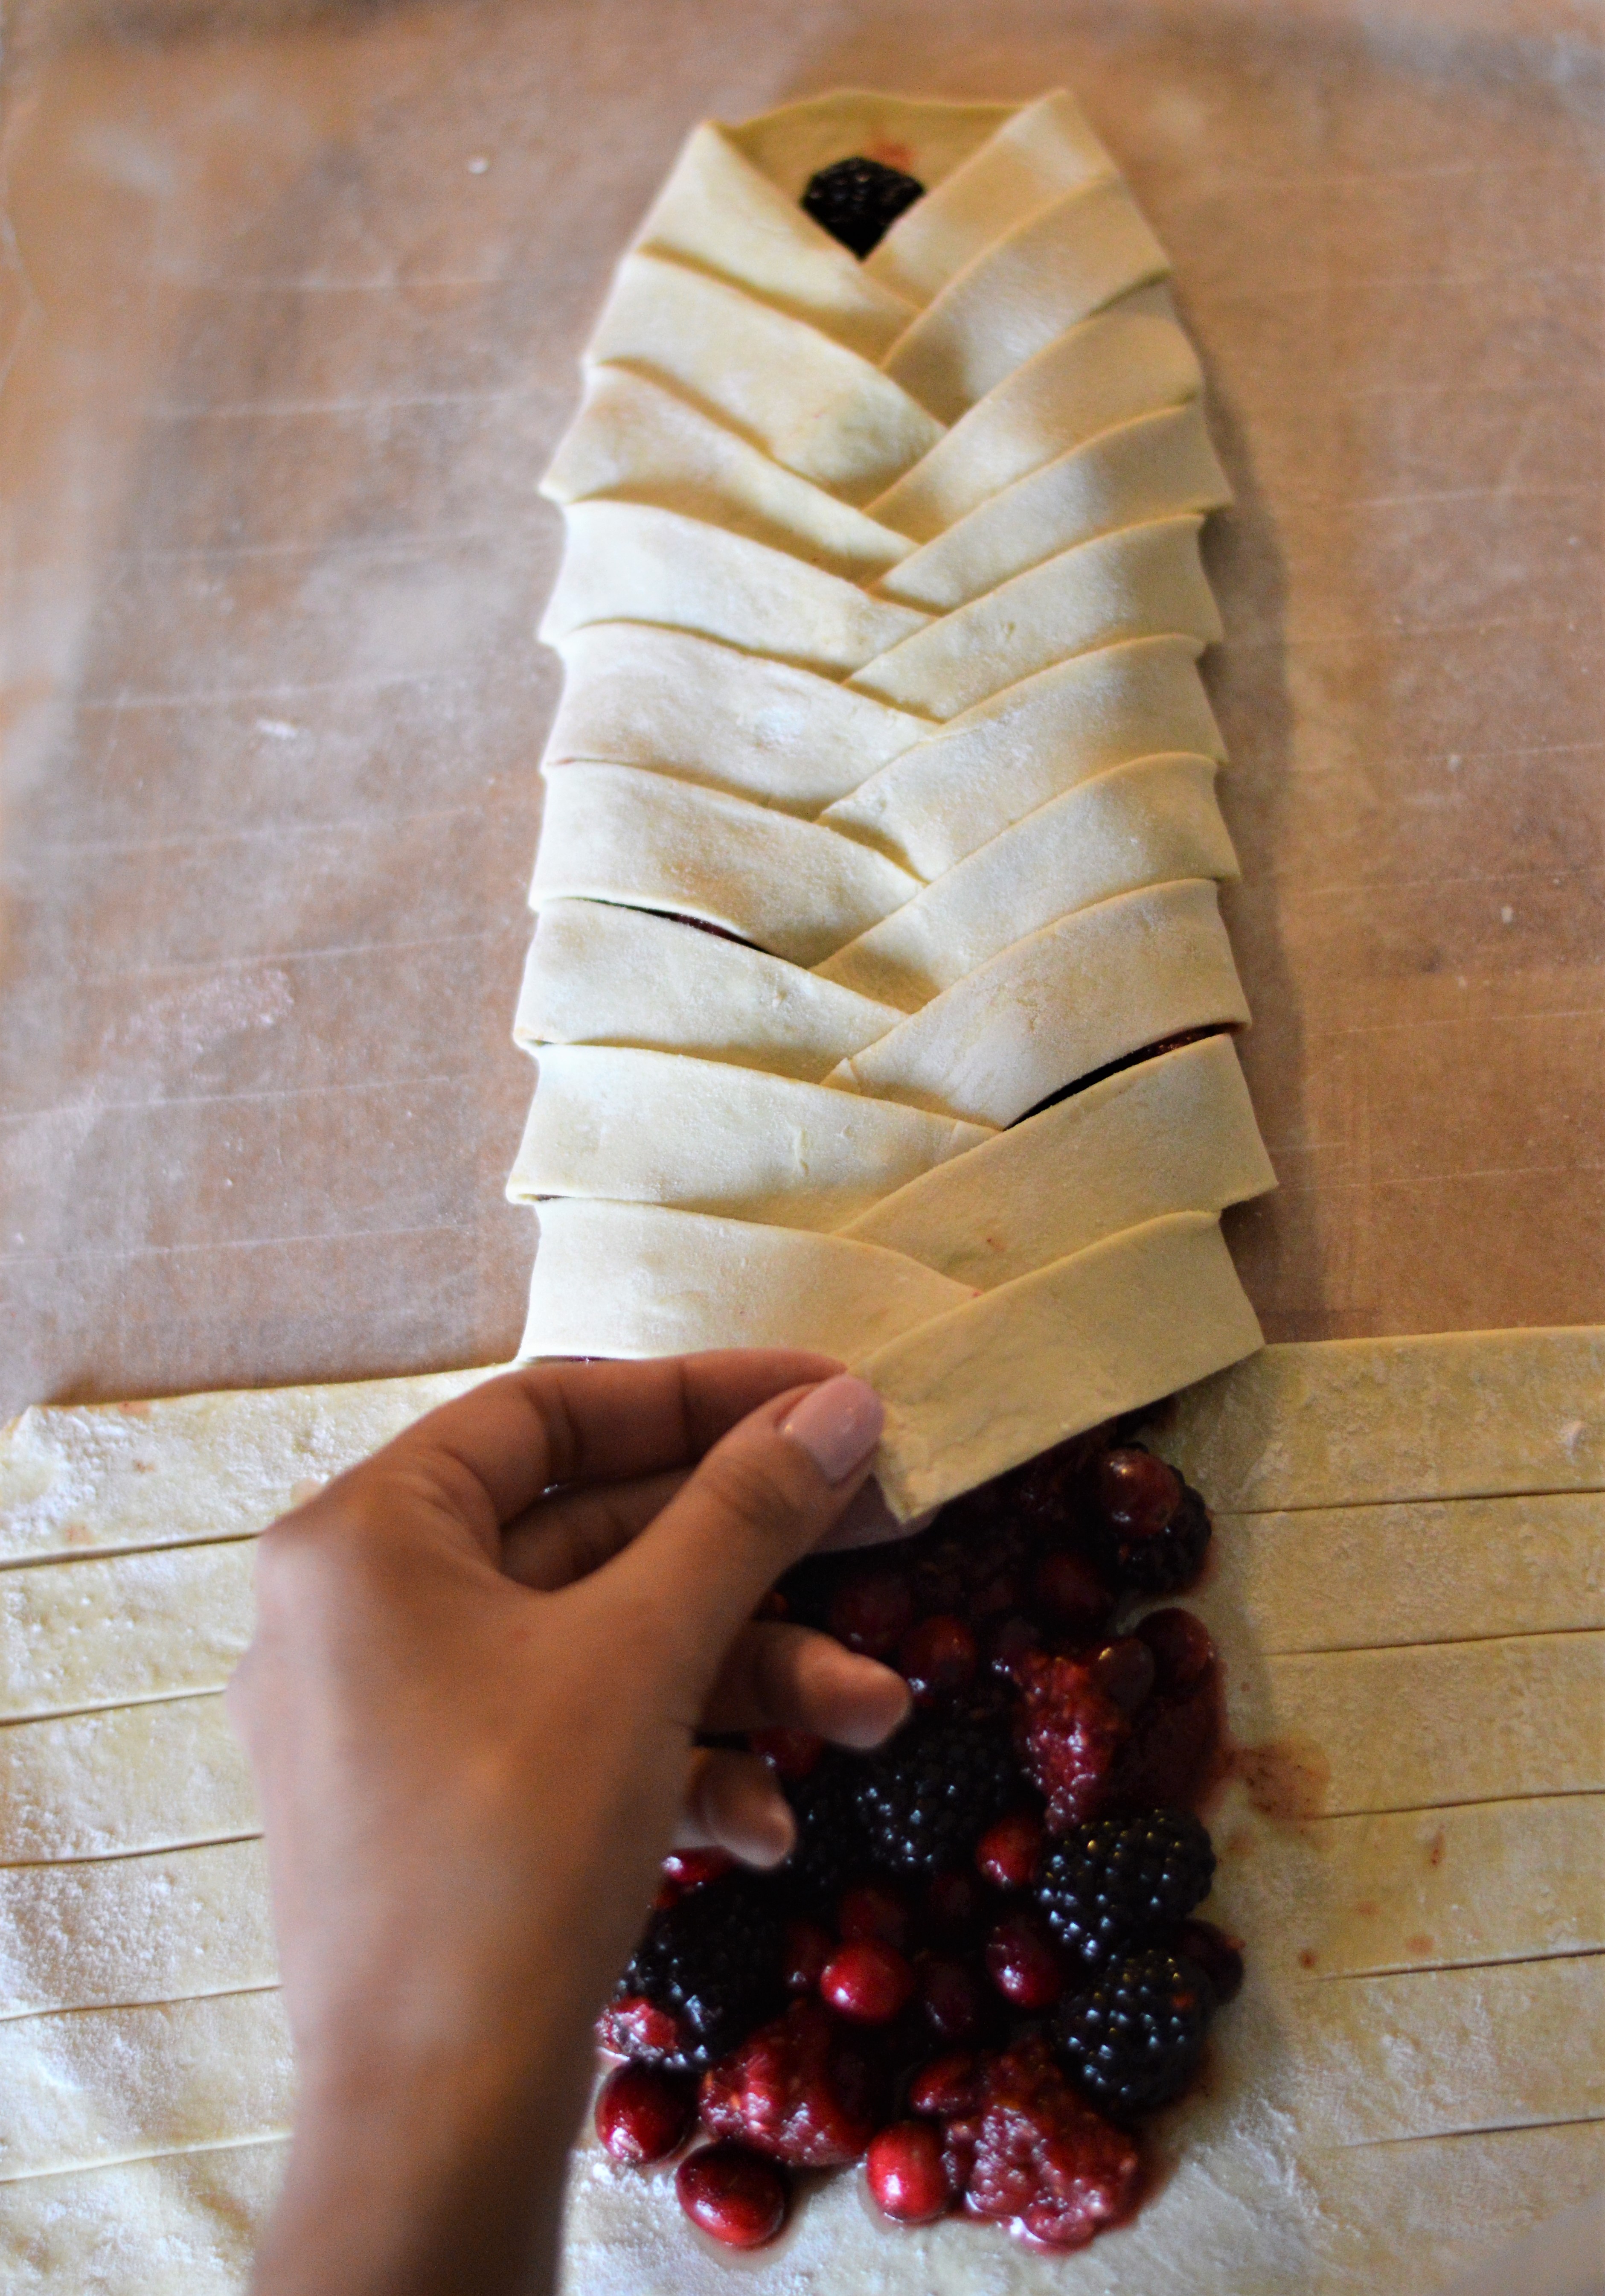 Braided pastry dough